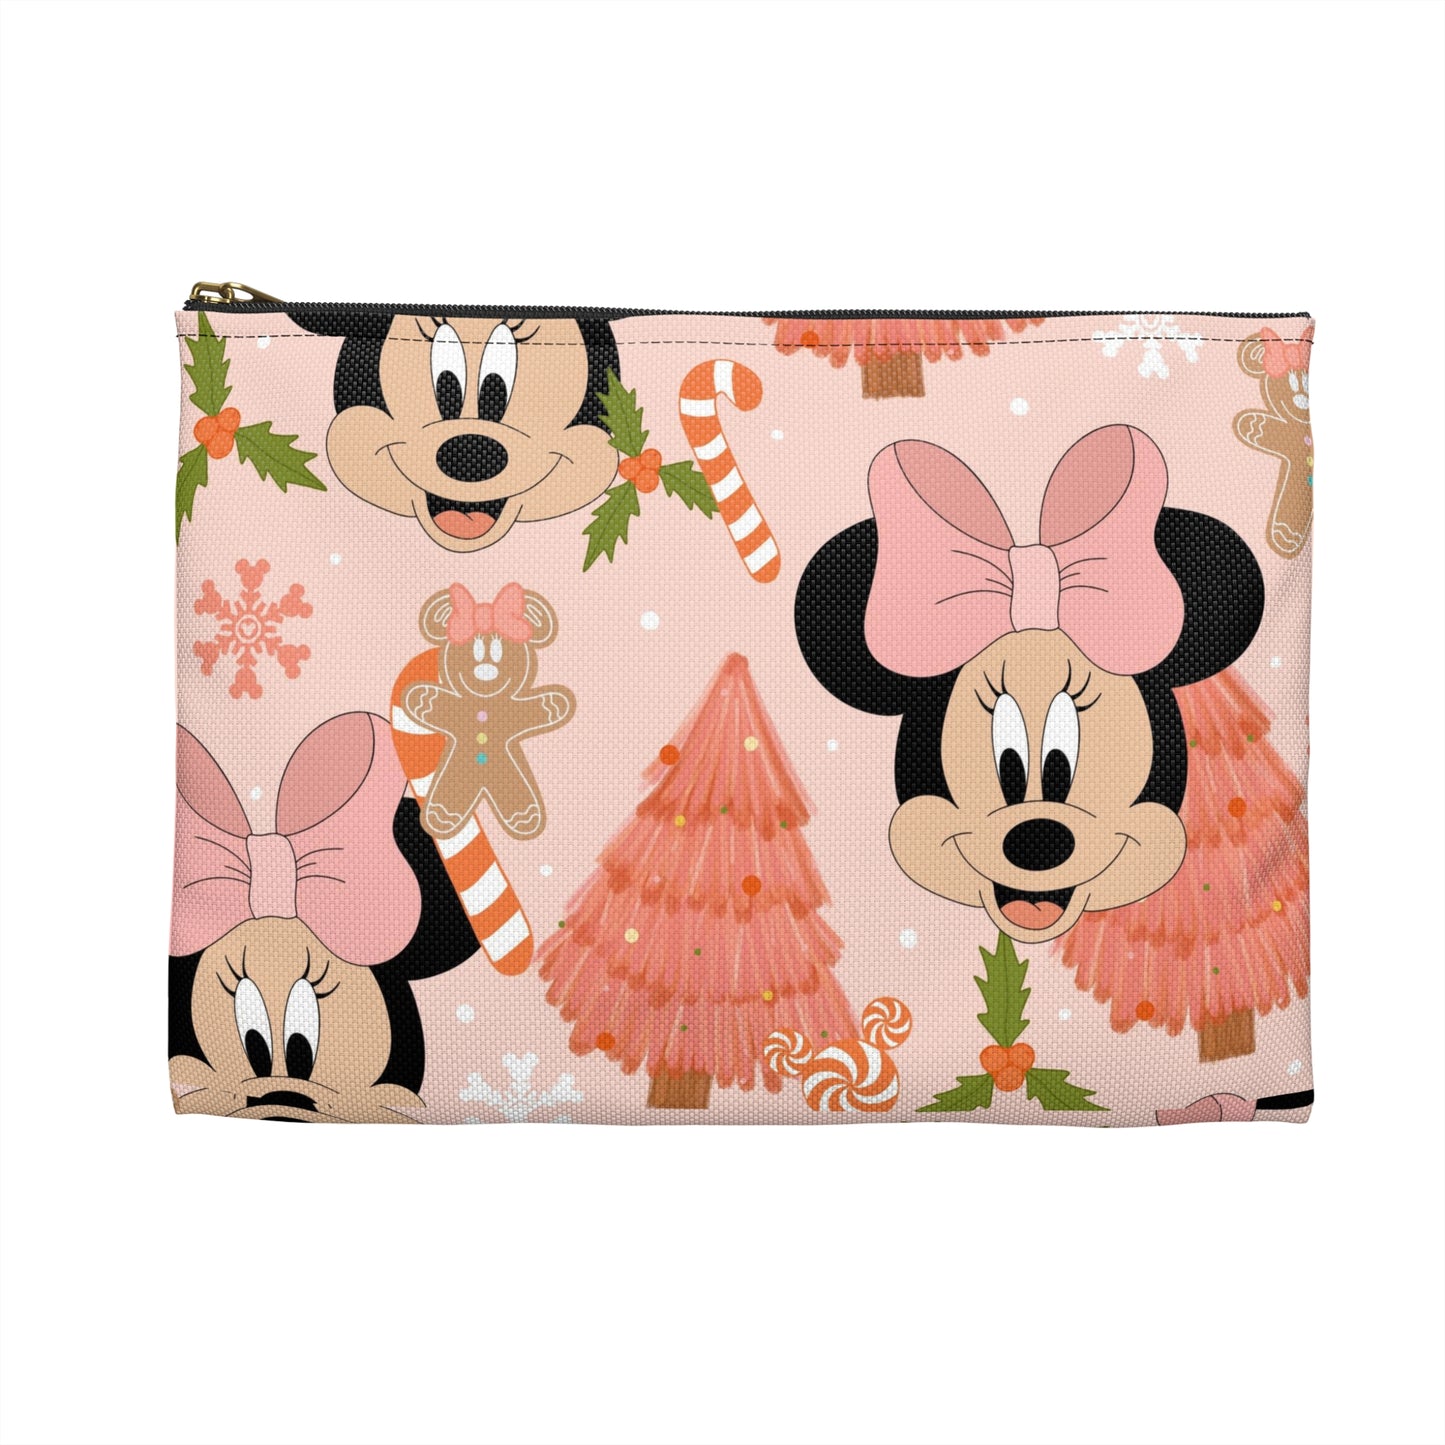 Merry Minnie Christmas Accessory Pouch